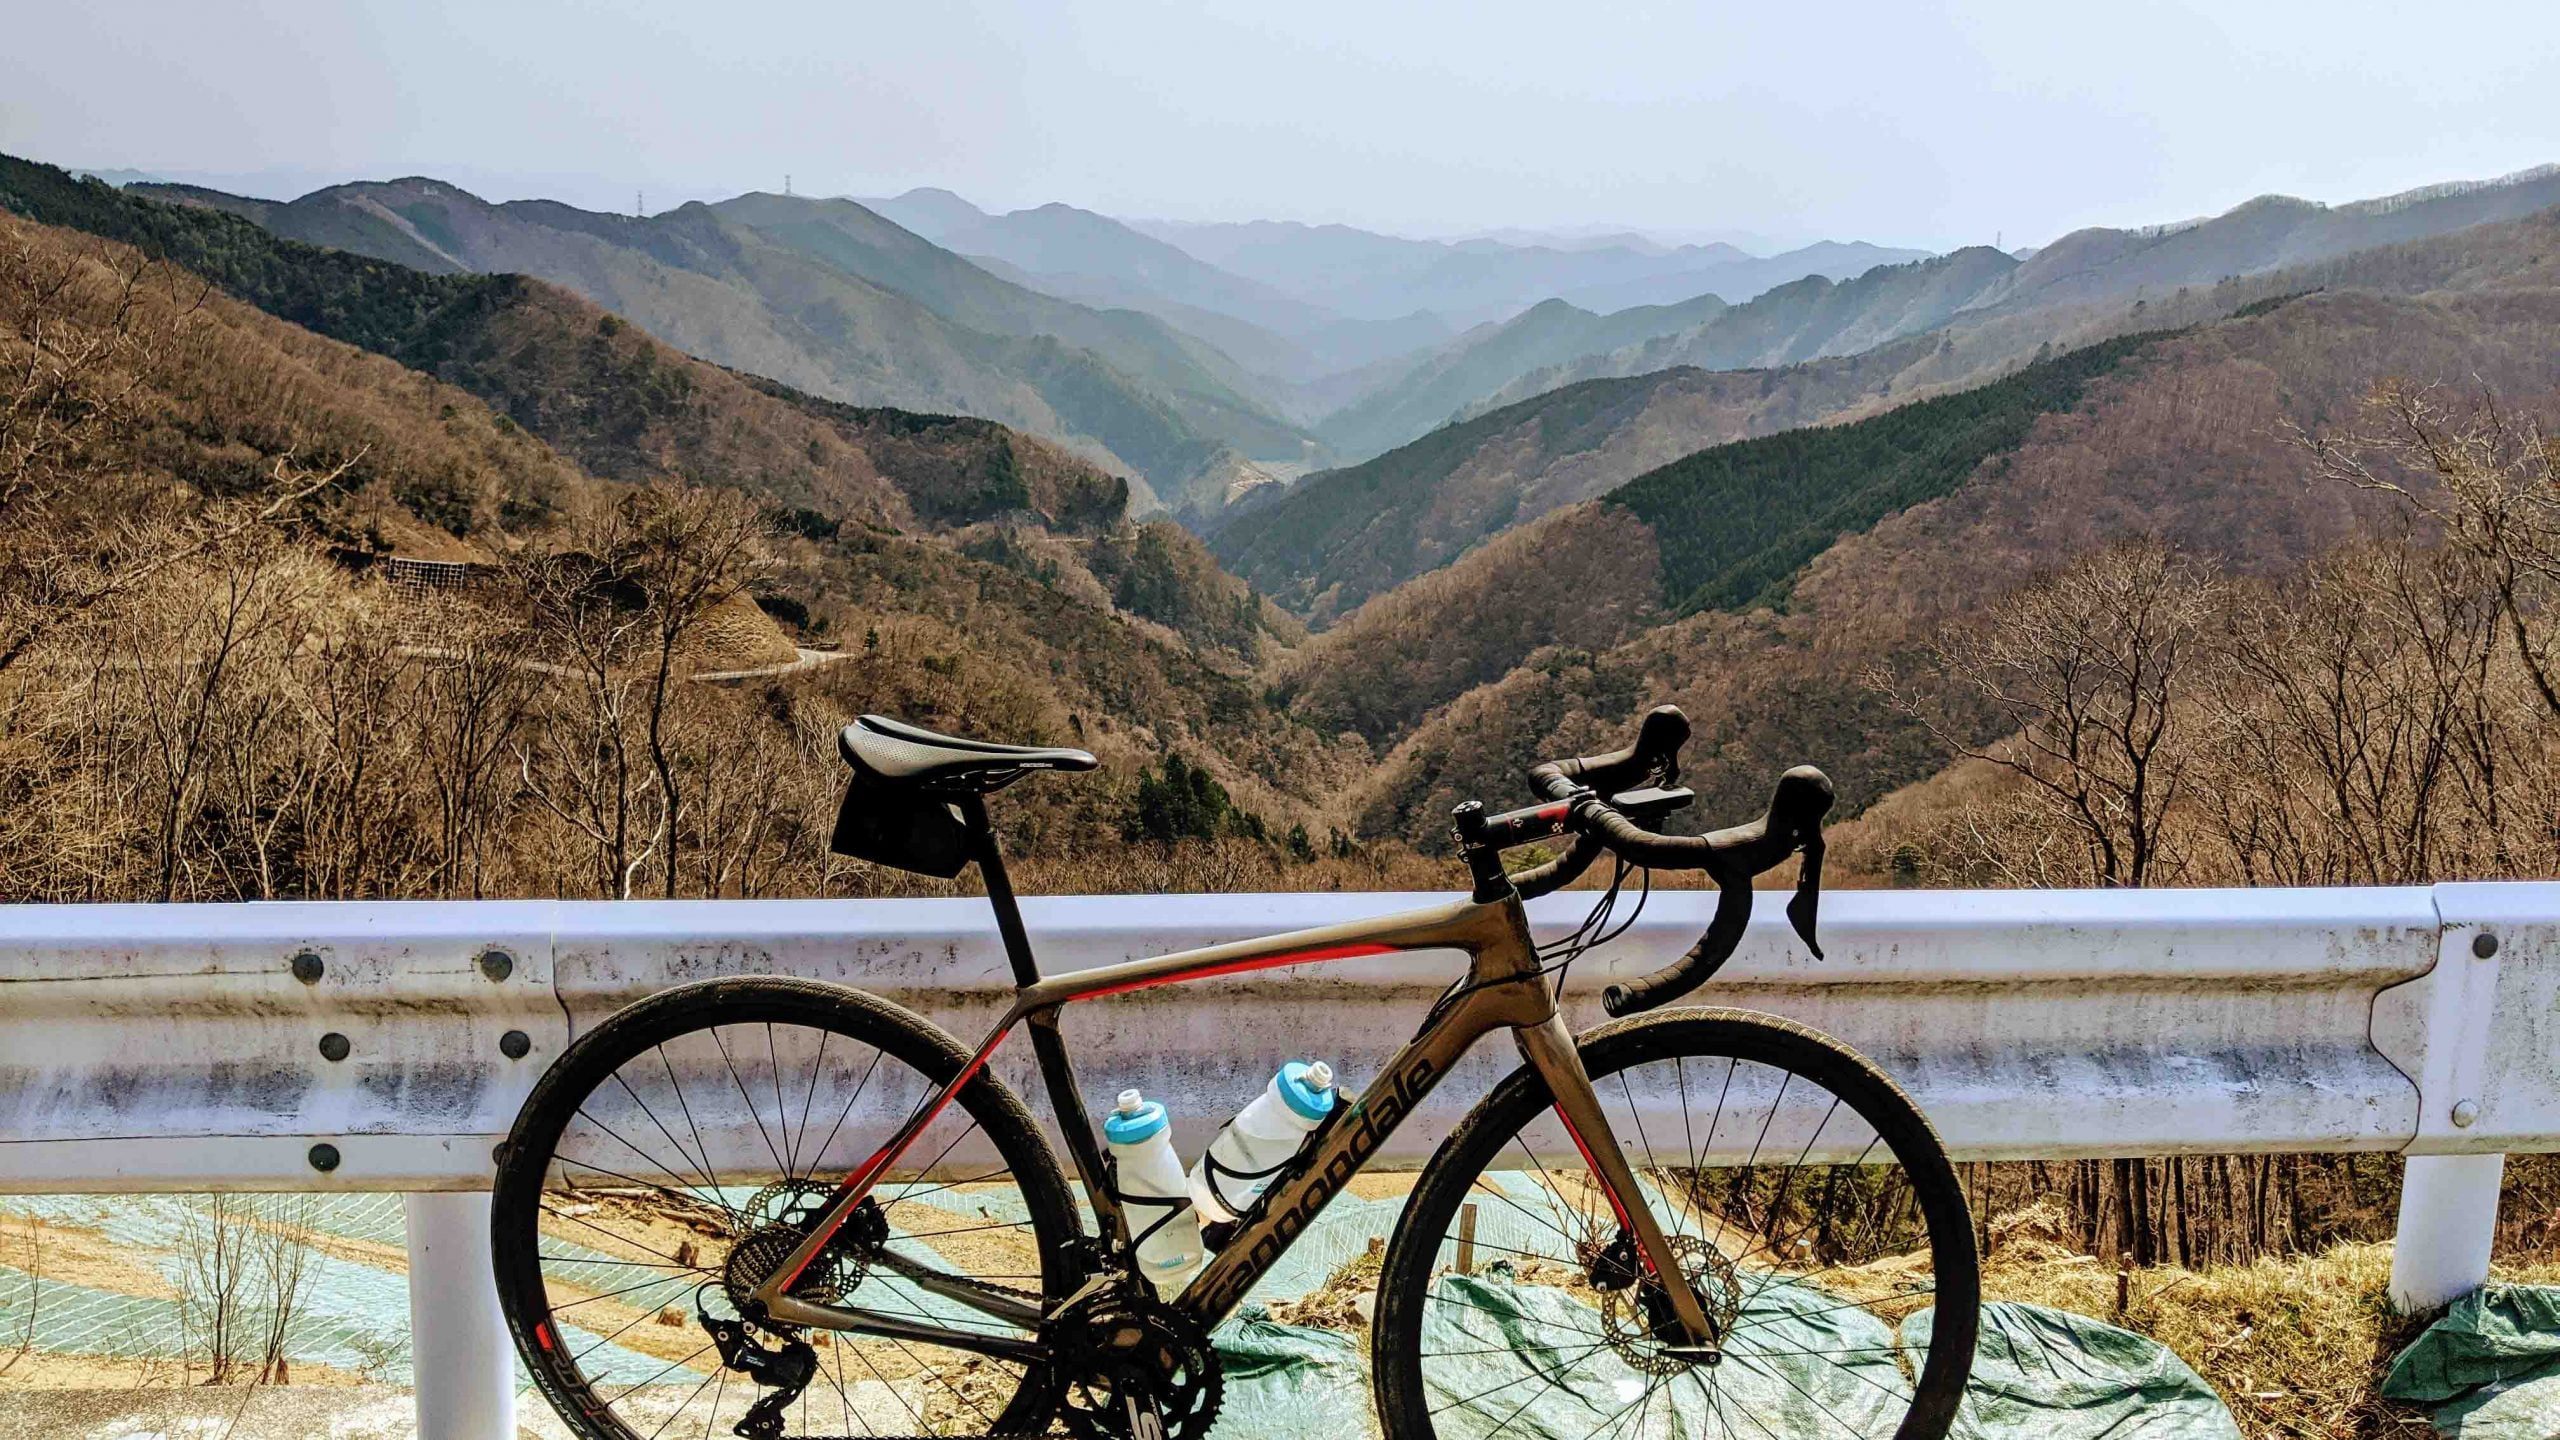 Bike with backdrop of mountains in Japan